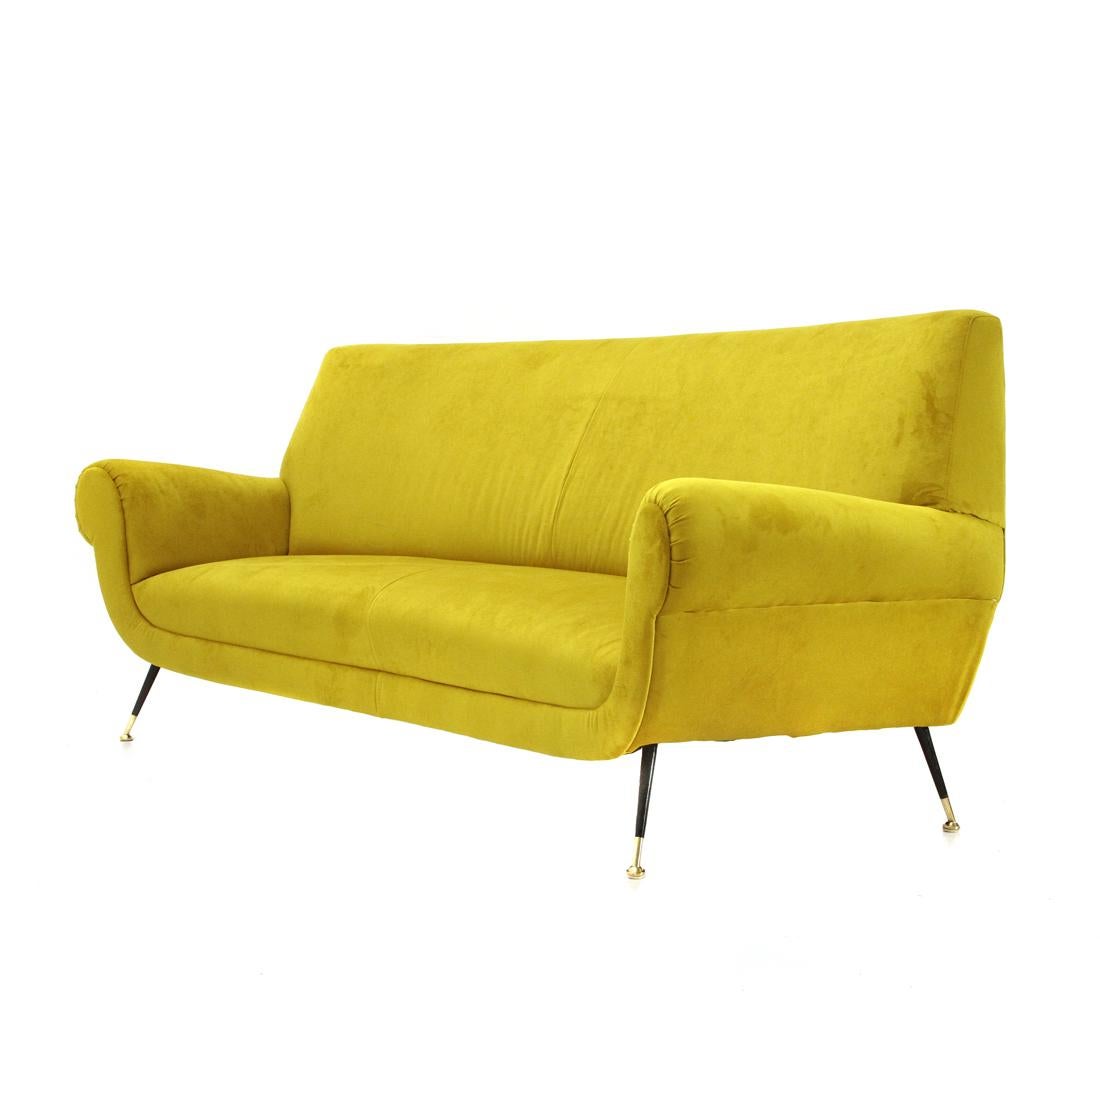 Italian-made sofa produced in the early 1960s.
Padded wooden structure lined with new ocher yellow velvet fabric.
Spiked feet in black painted metal with brass terminals.
Good general conditions.

Dimensions: Length 210 cm, depth 90 cm, height